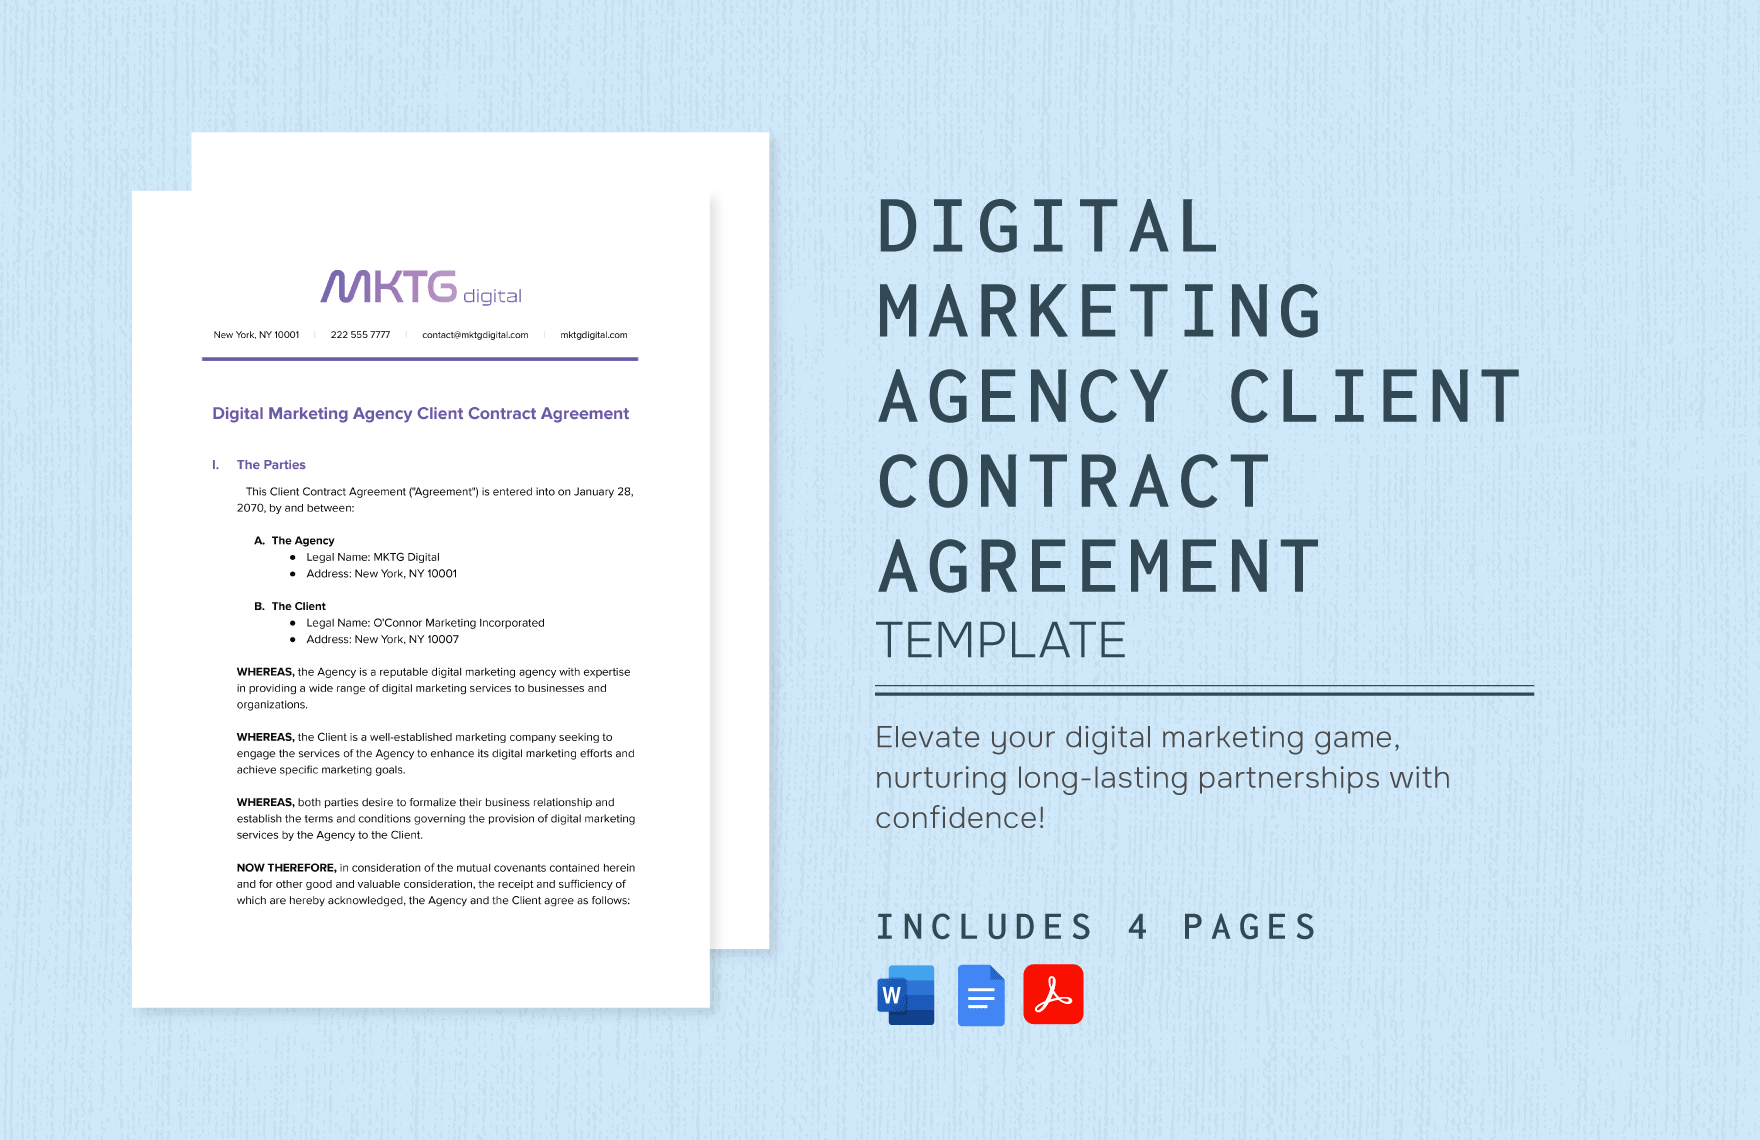 Digital Marketing Agency Client Contract Agreement Template